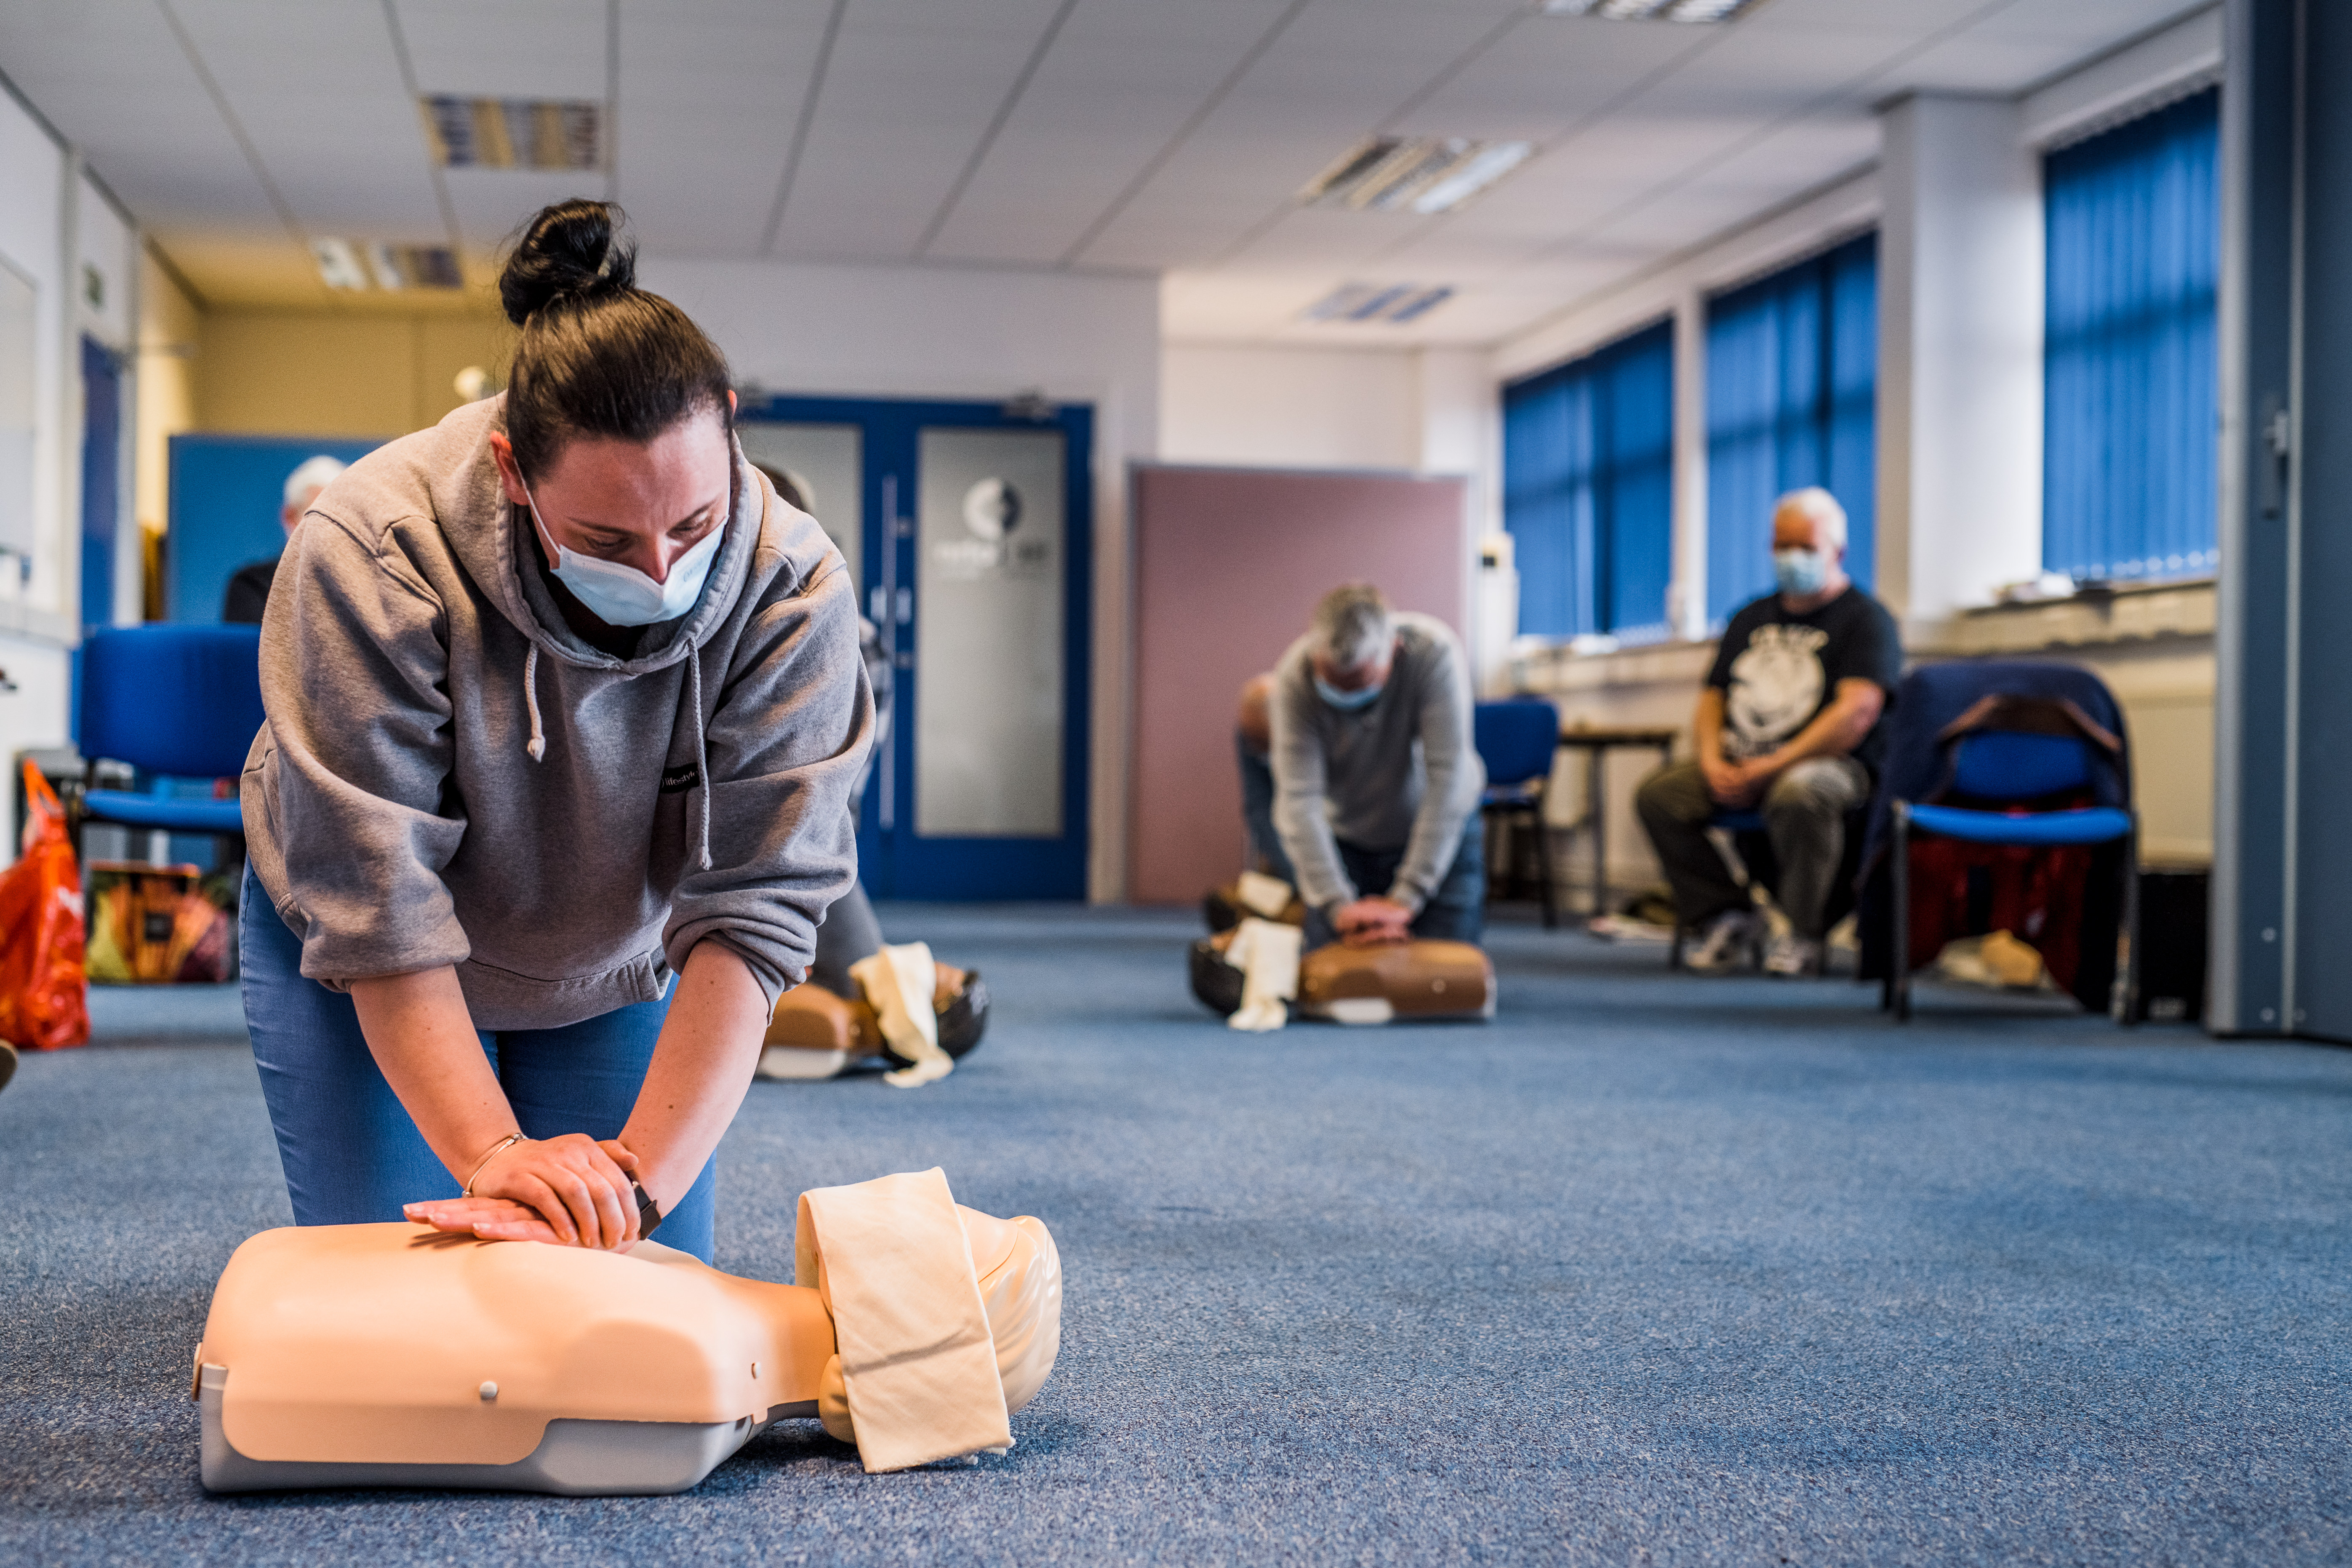 what are the legal requirements for first aid at work?